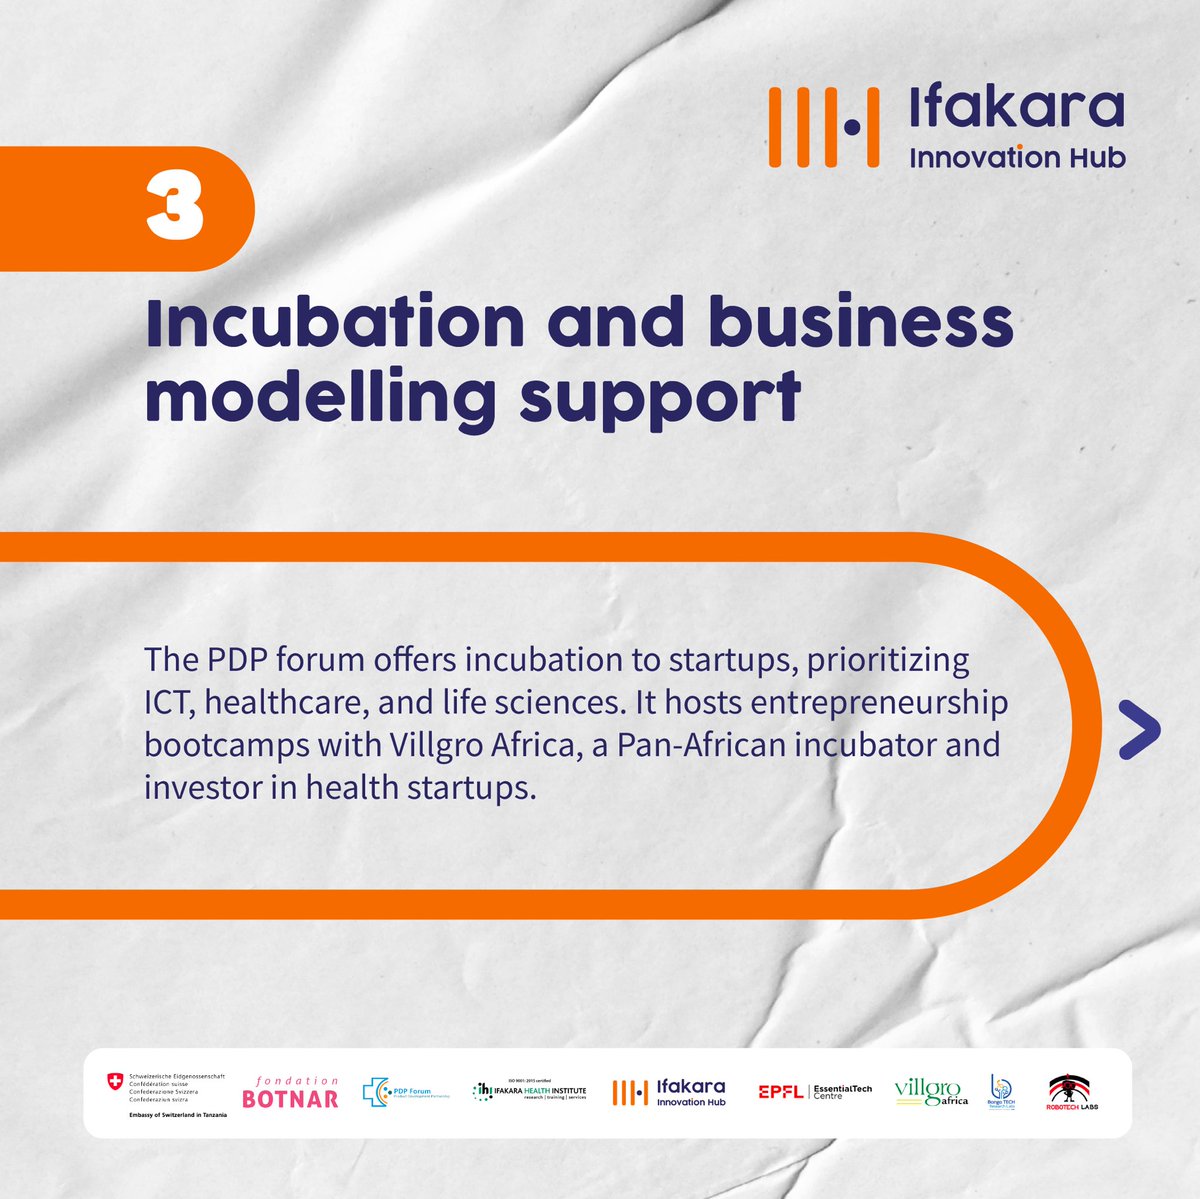 The startups incubated by the @HubIfakara, are offered various capacity-building trainings on business and company development in adherence to national and international standards. @VillgroAfrica #Innovation #Health #Medical #IIH #Investor #Venture #Startup #TechforGood